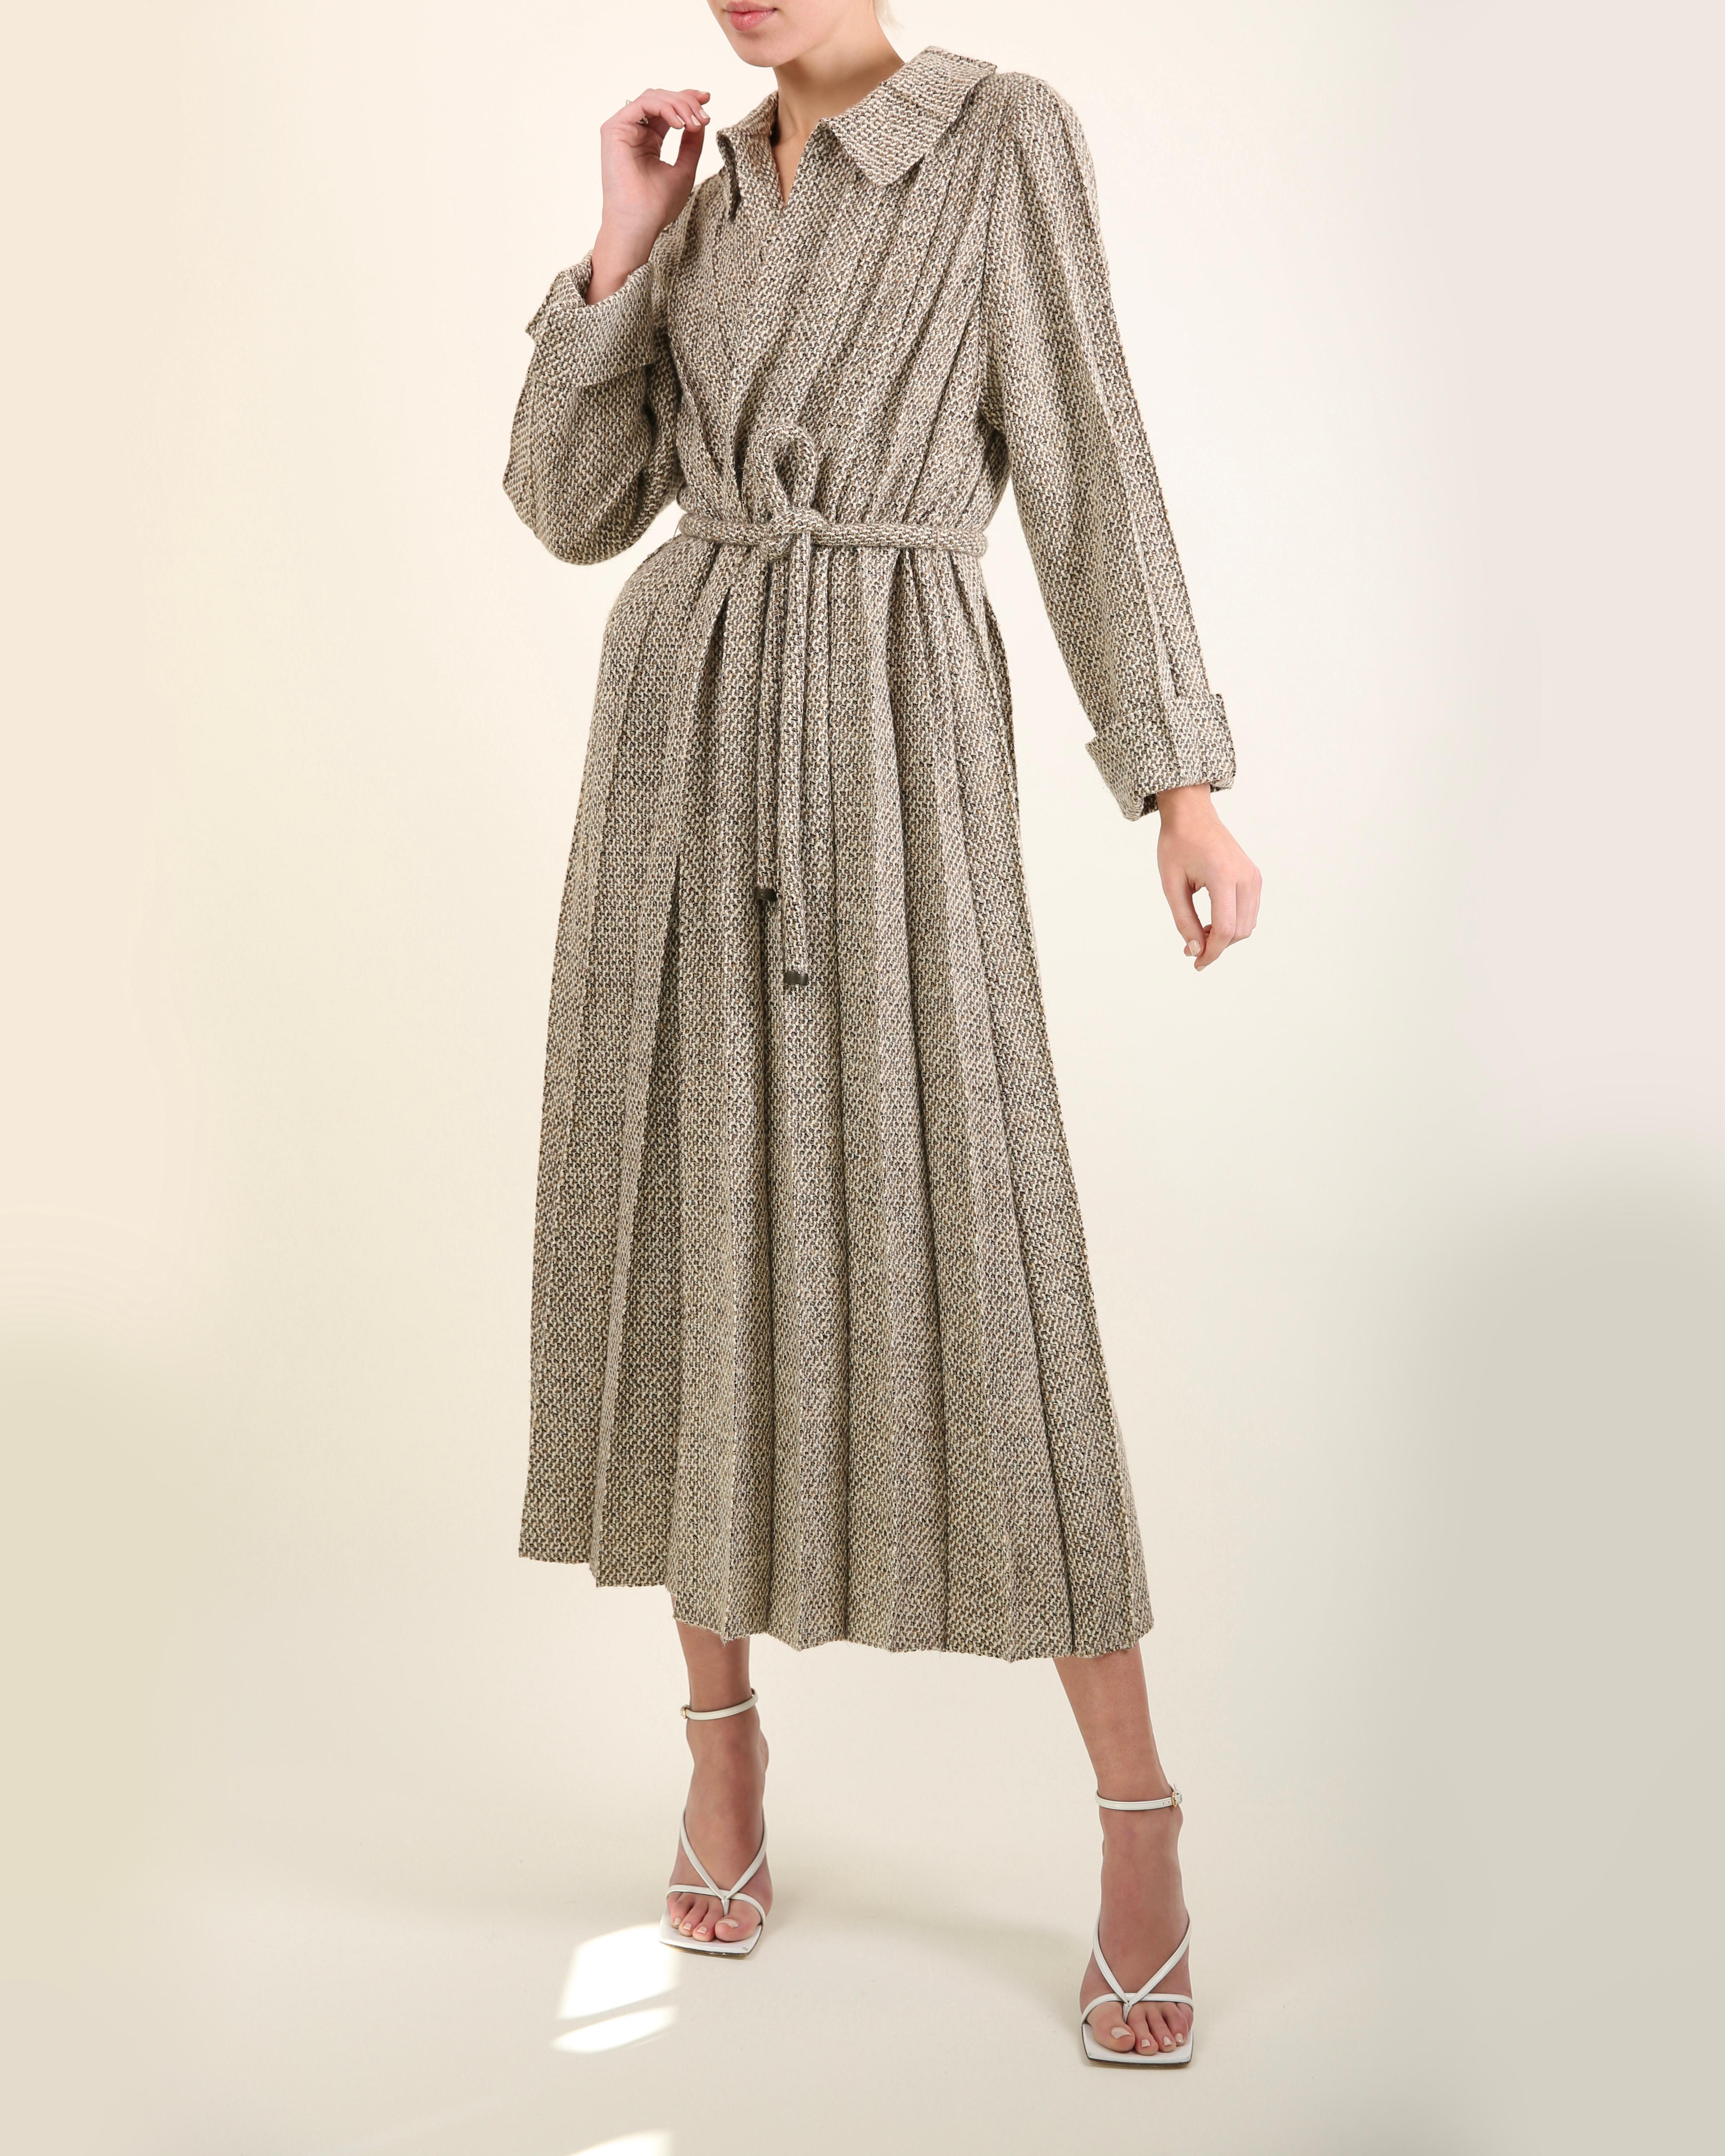 Beige Chanel Fall 1998 brown & white tweed wool long pleated maxi jacket dress coat   For Sale